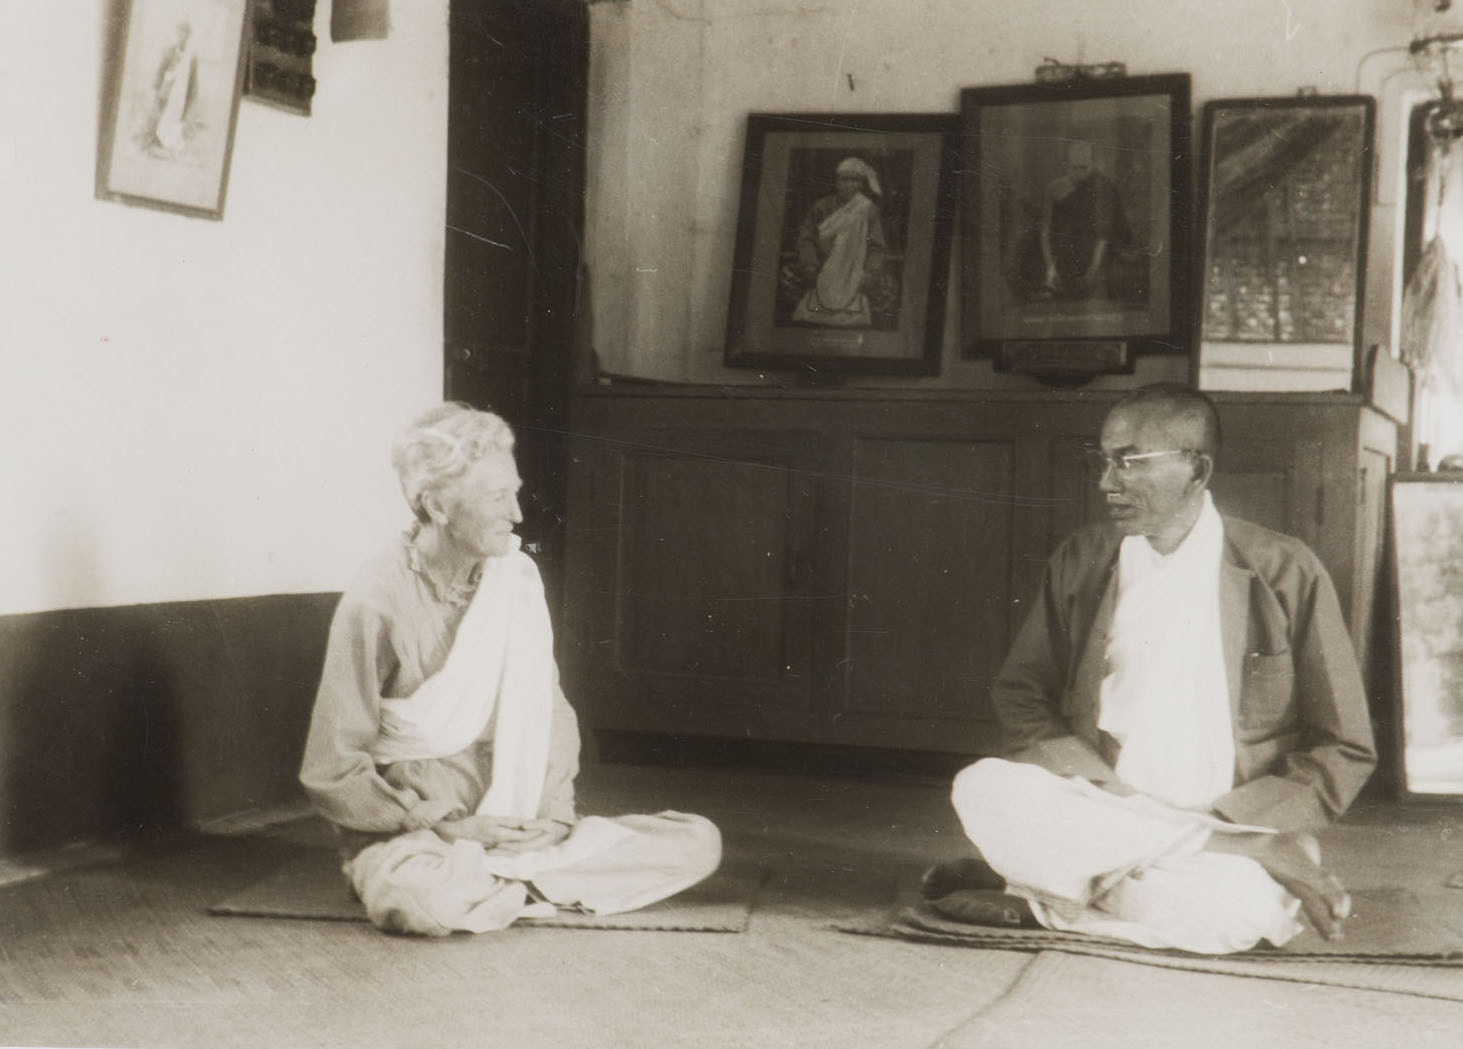 An older woman and an older man wearing Buddhist monk clothes sit cross-legged next to each other.